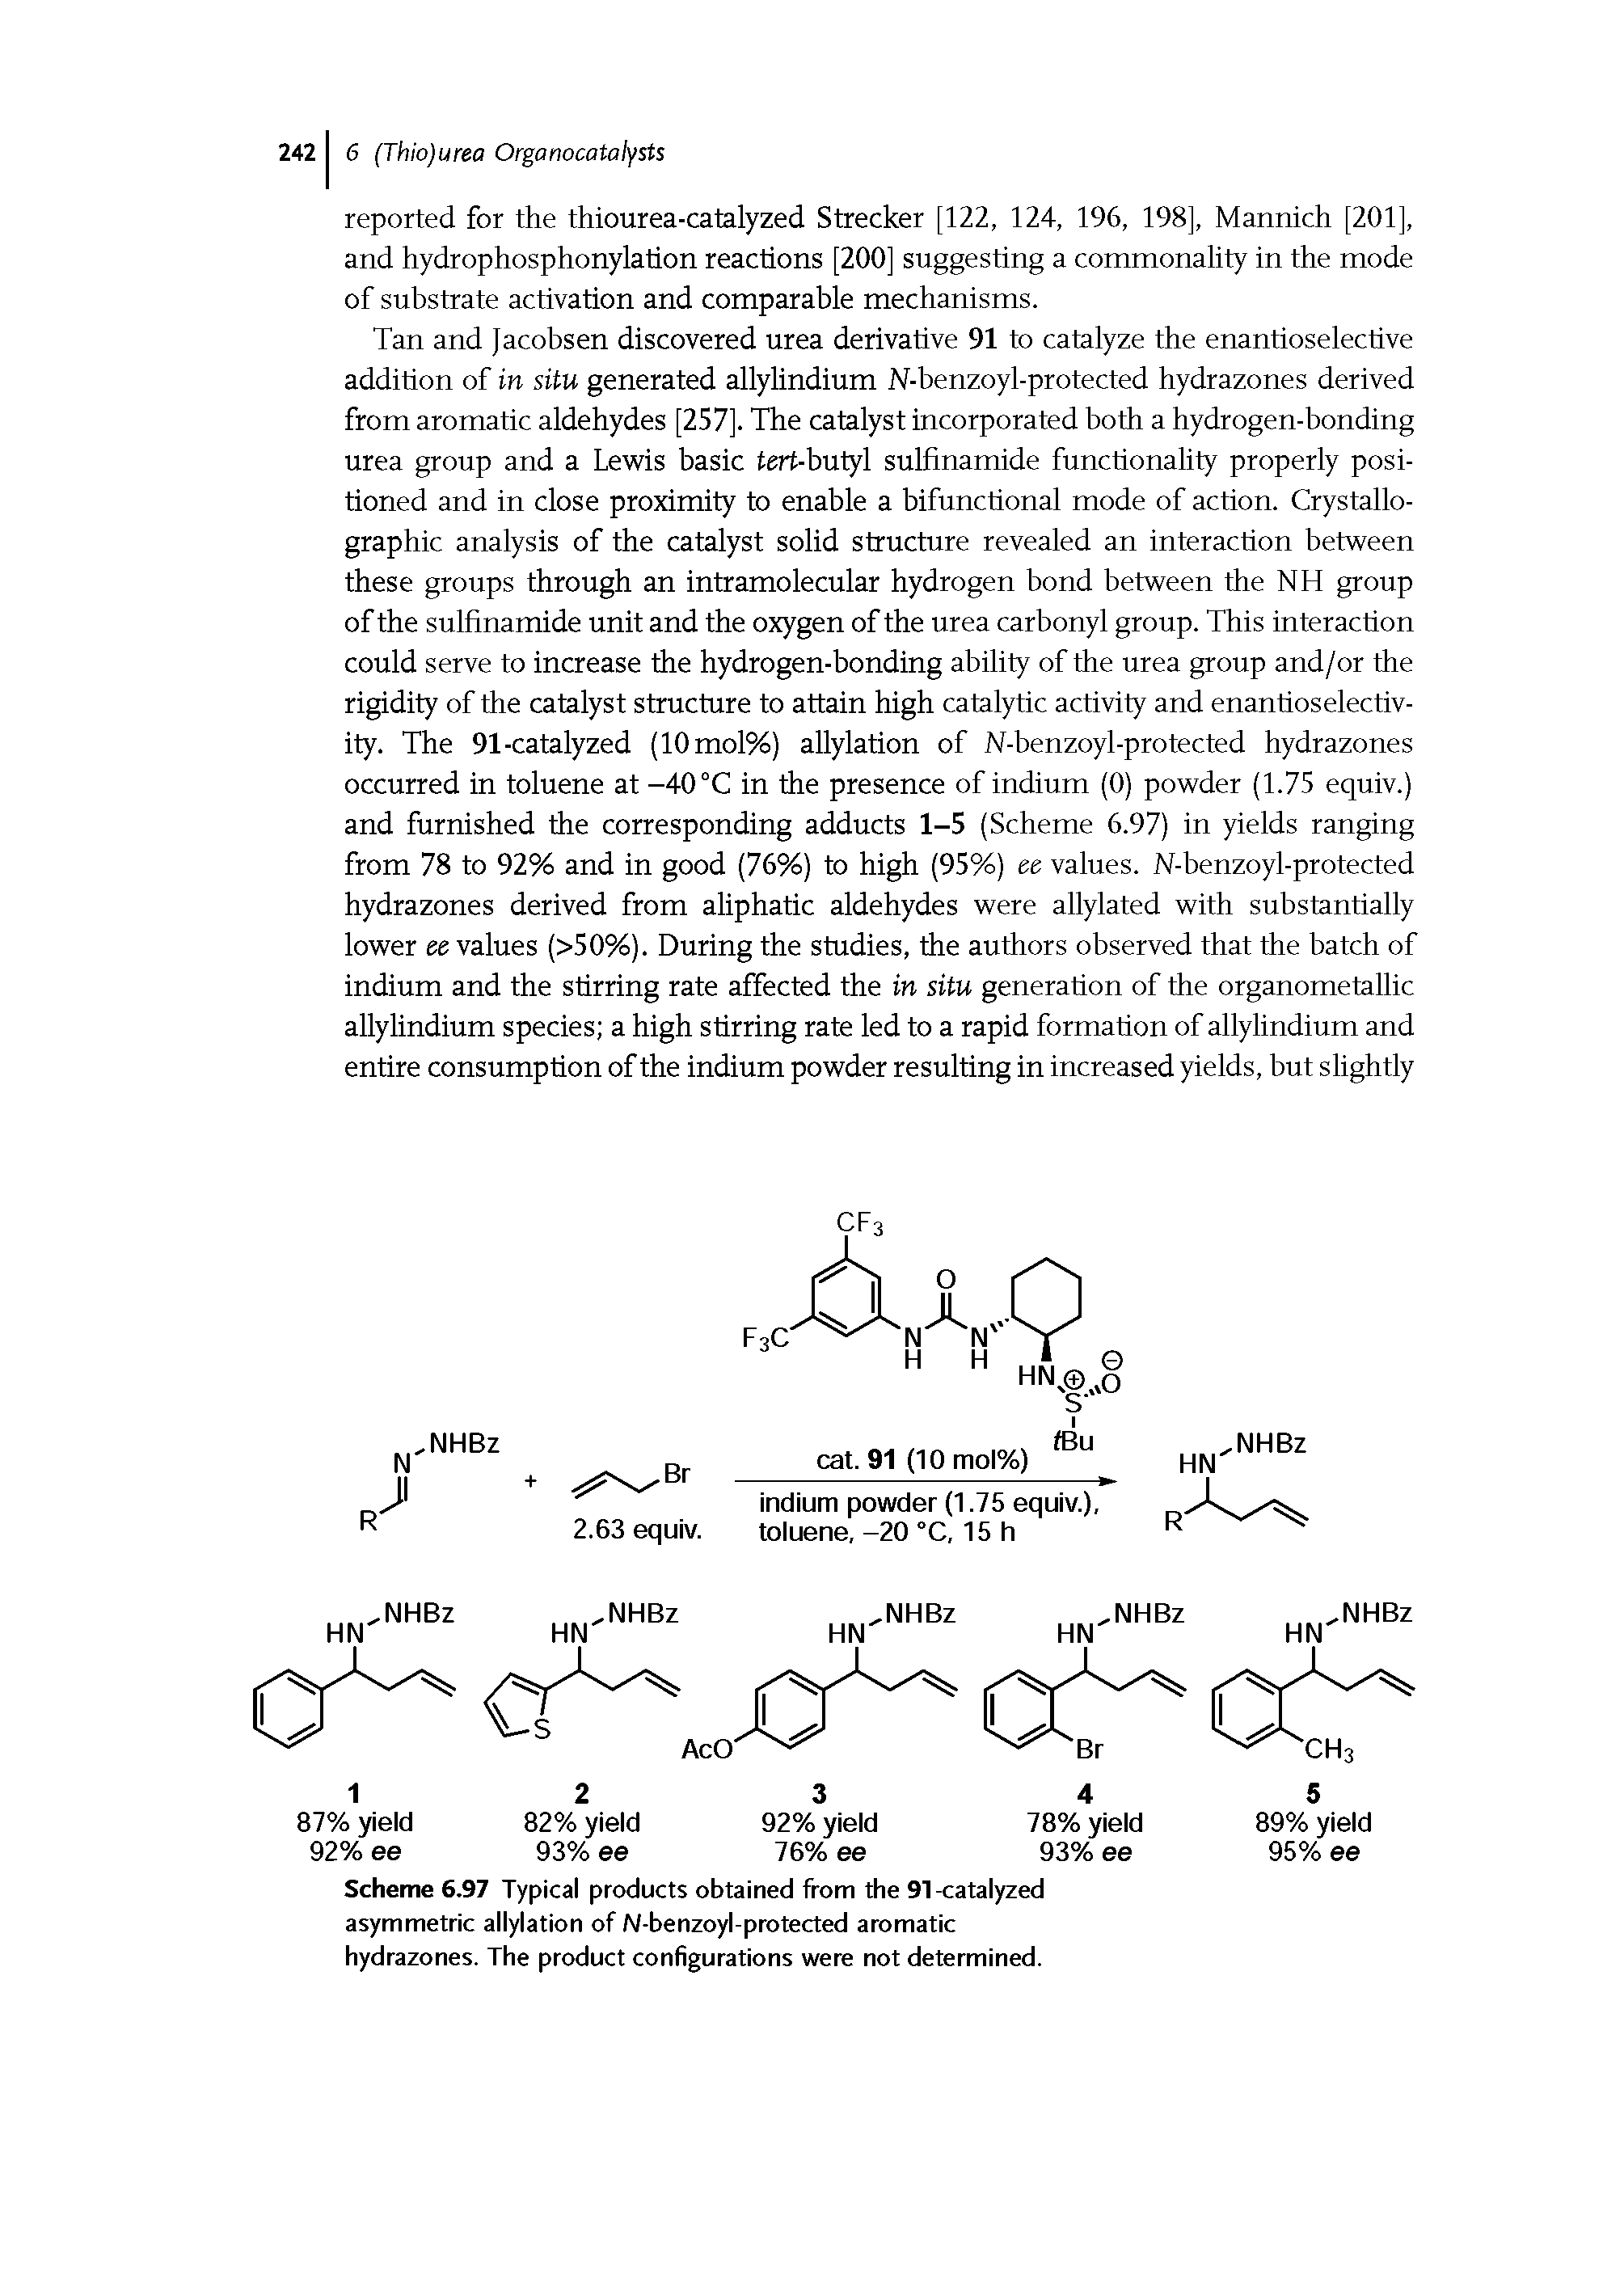 Scheme 6.97 Typical products obtained from the 91-catalyzed asymmetric allylation of N-benzoyl-protected aromatic hydrazones. The product configurations were not determined.